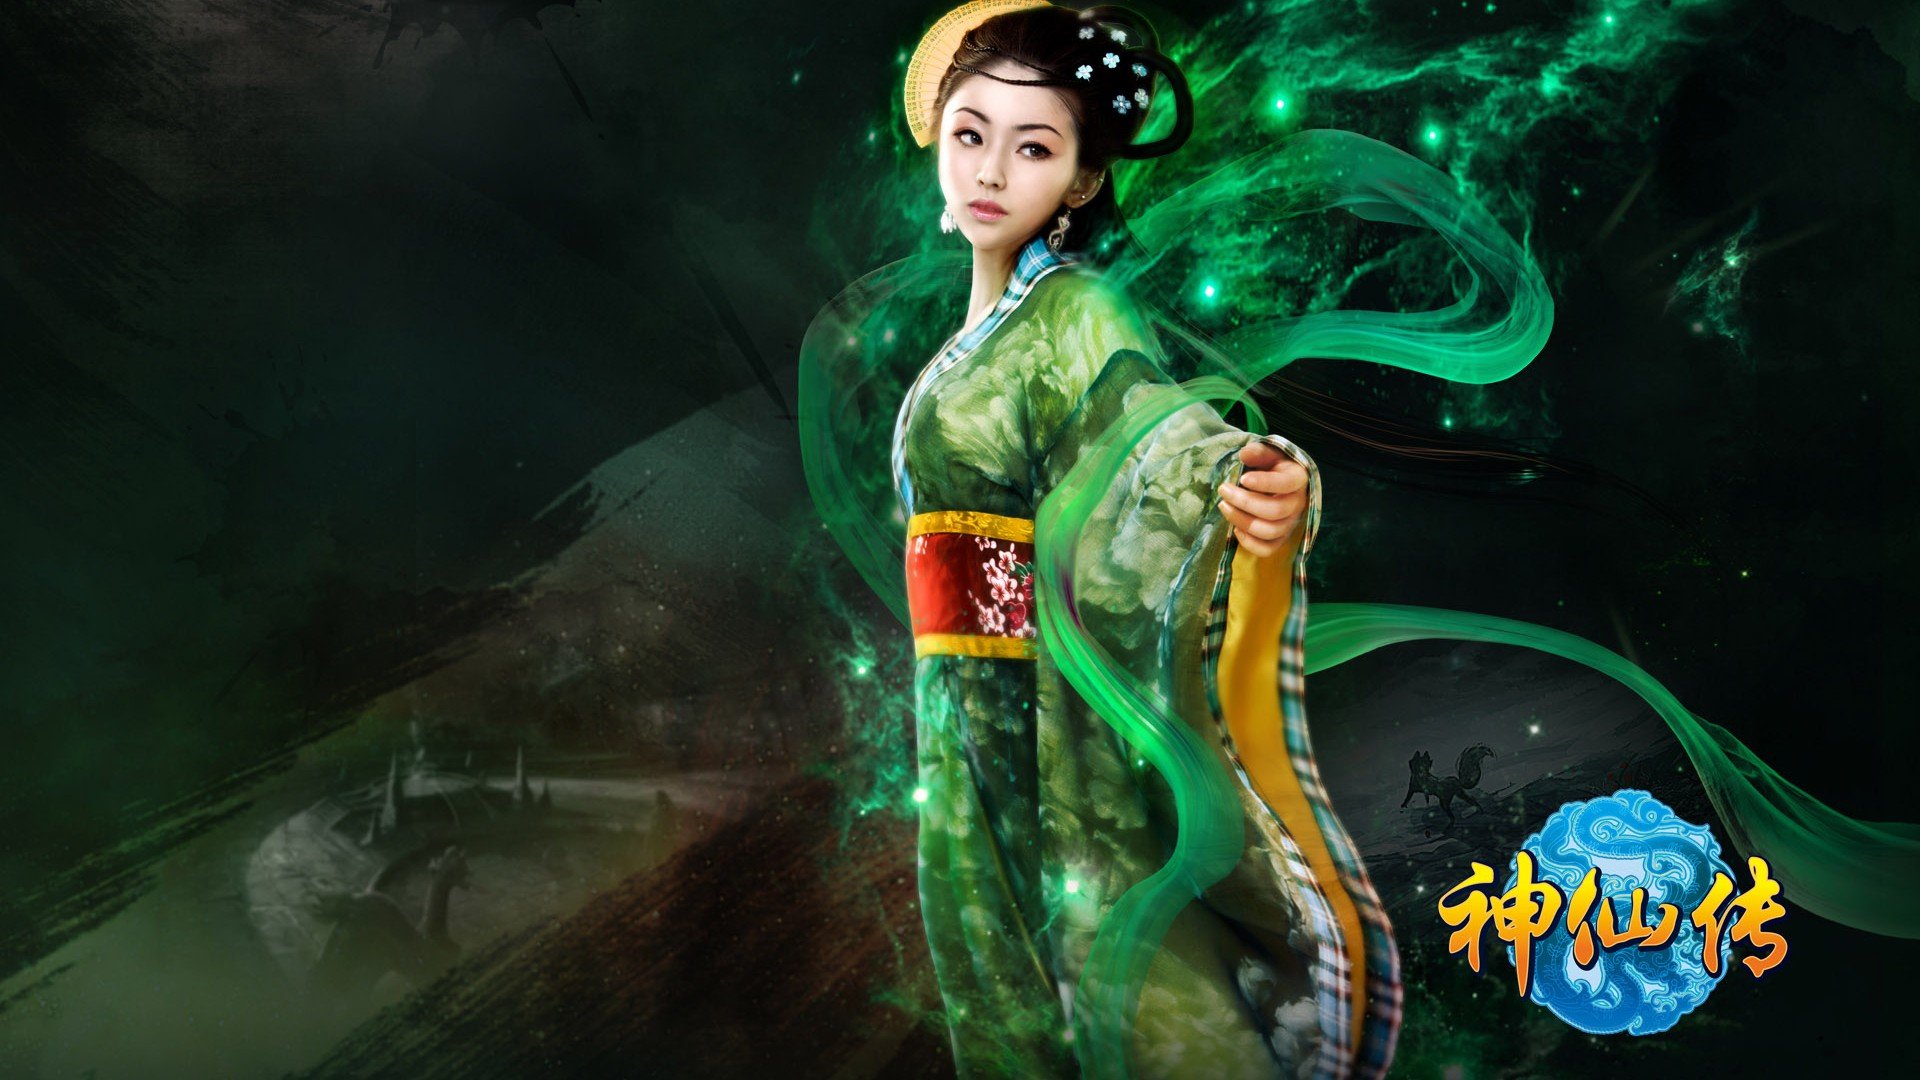 jade, Dynasty, Fantasy, Mmo, Rpg, Action, Fighting, Martial, Kung, 1jaded, Perfect, Online, Zhu, Xian, Supernatural, Biography, Cosplay, Girl, Girls Wallpaper